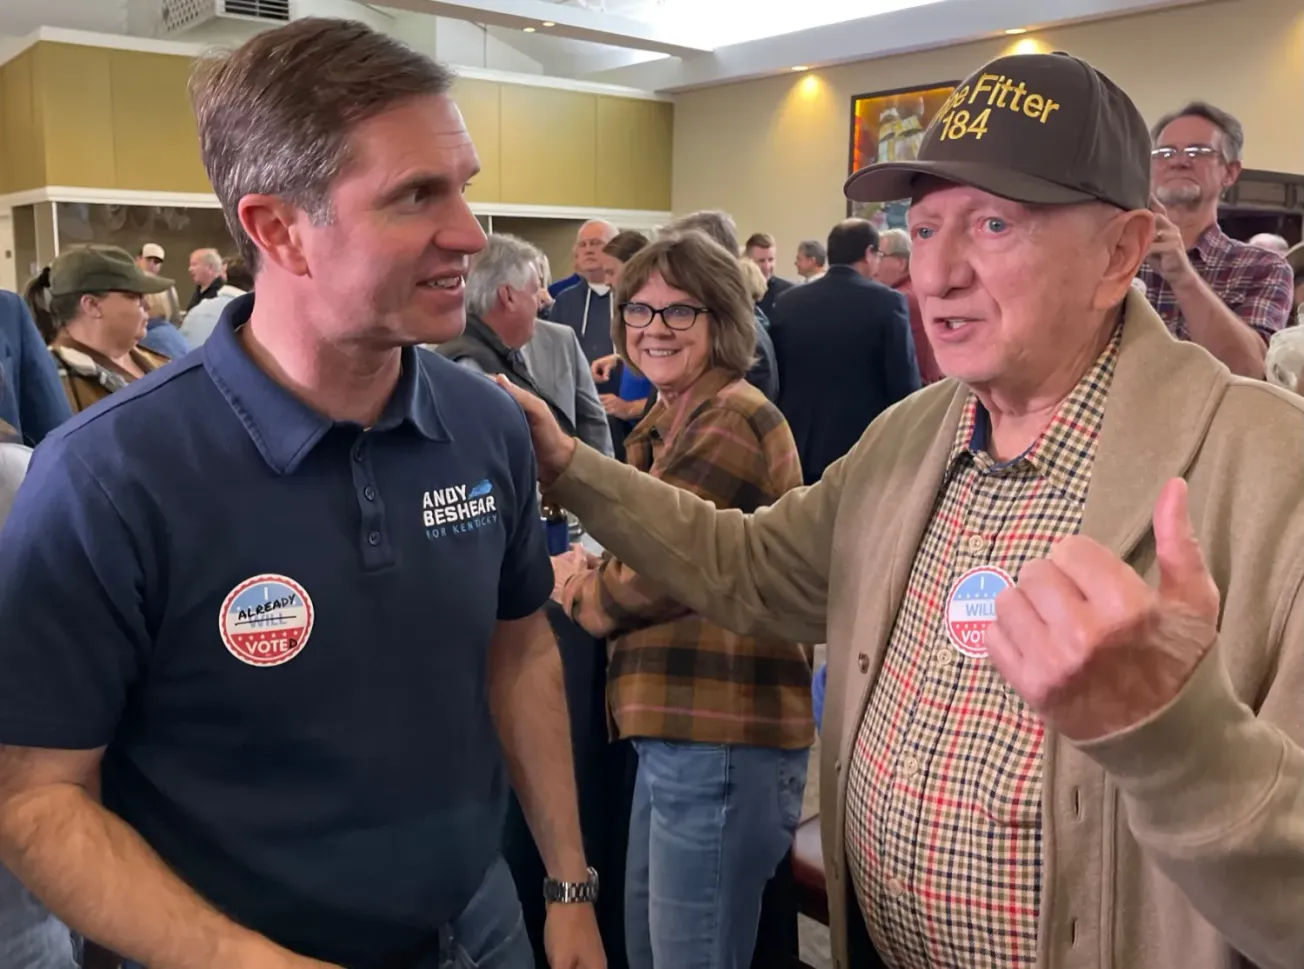 ‘There is only one candidate for workers in Kentucky and that’s Andy Beshear.’